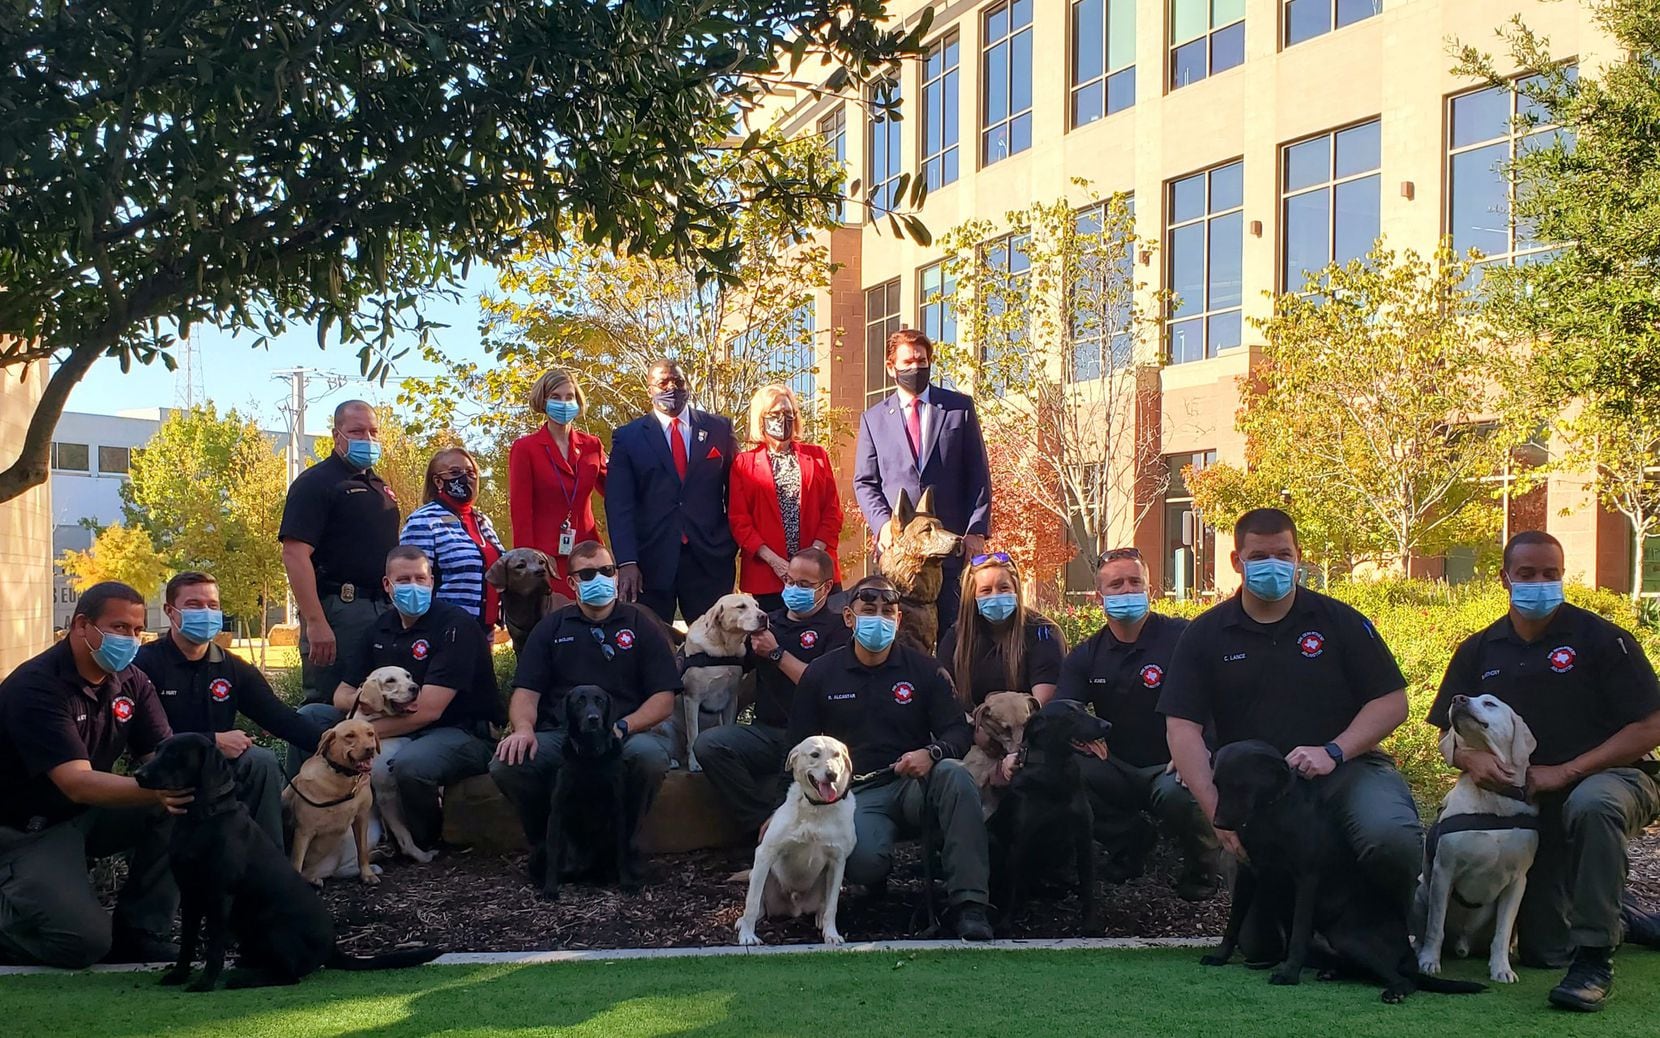 Arlington City Council members along with the city's K9 units pose around the new statue memorializing the city's service dogs. Both the fire and police departments use service dogs in their work.